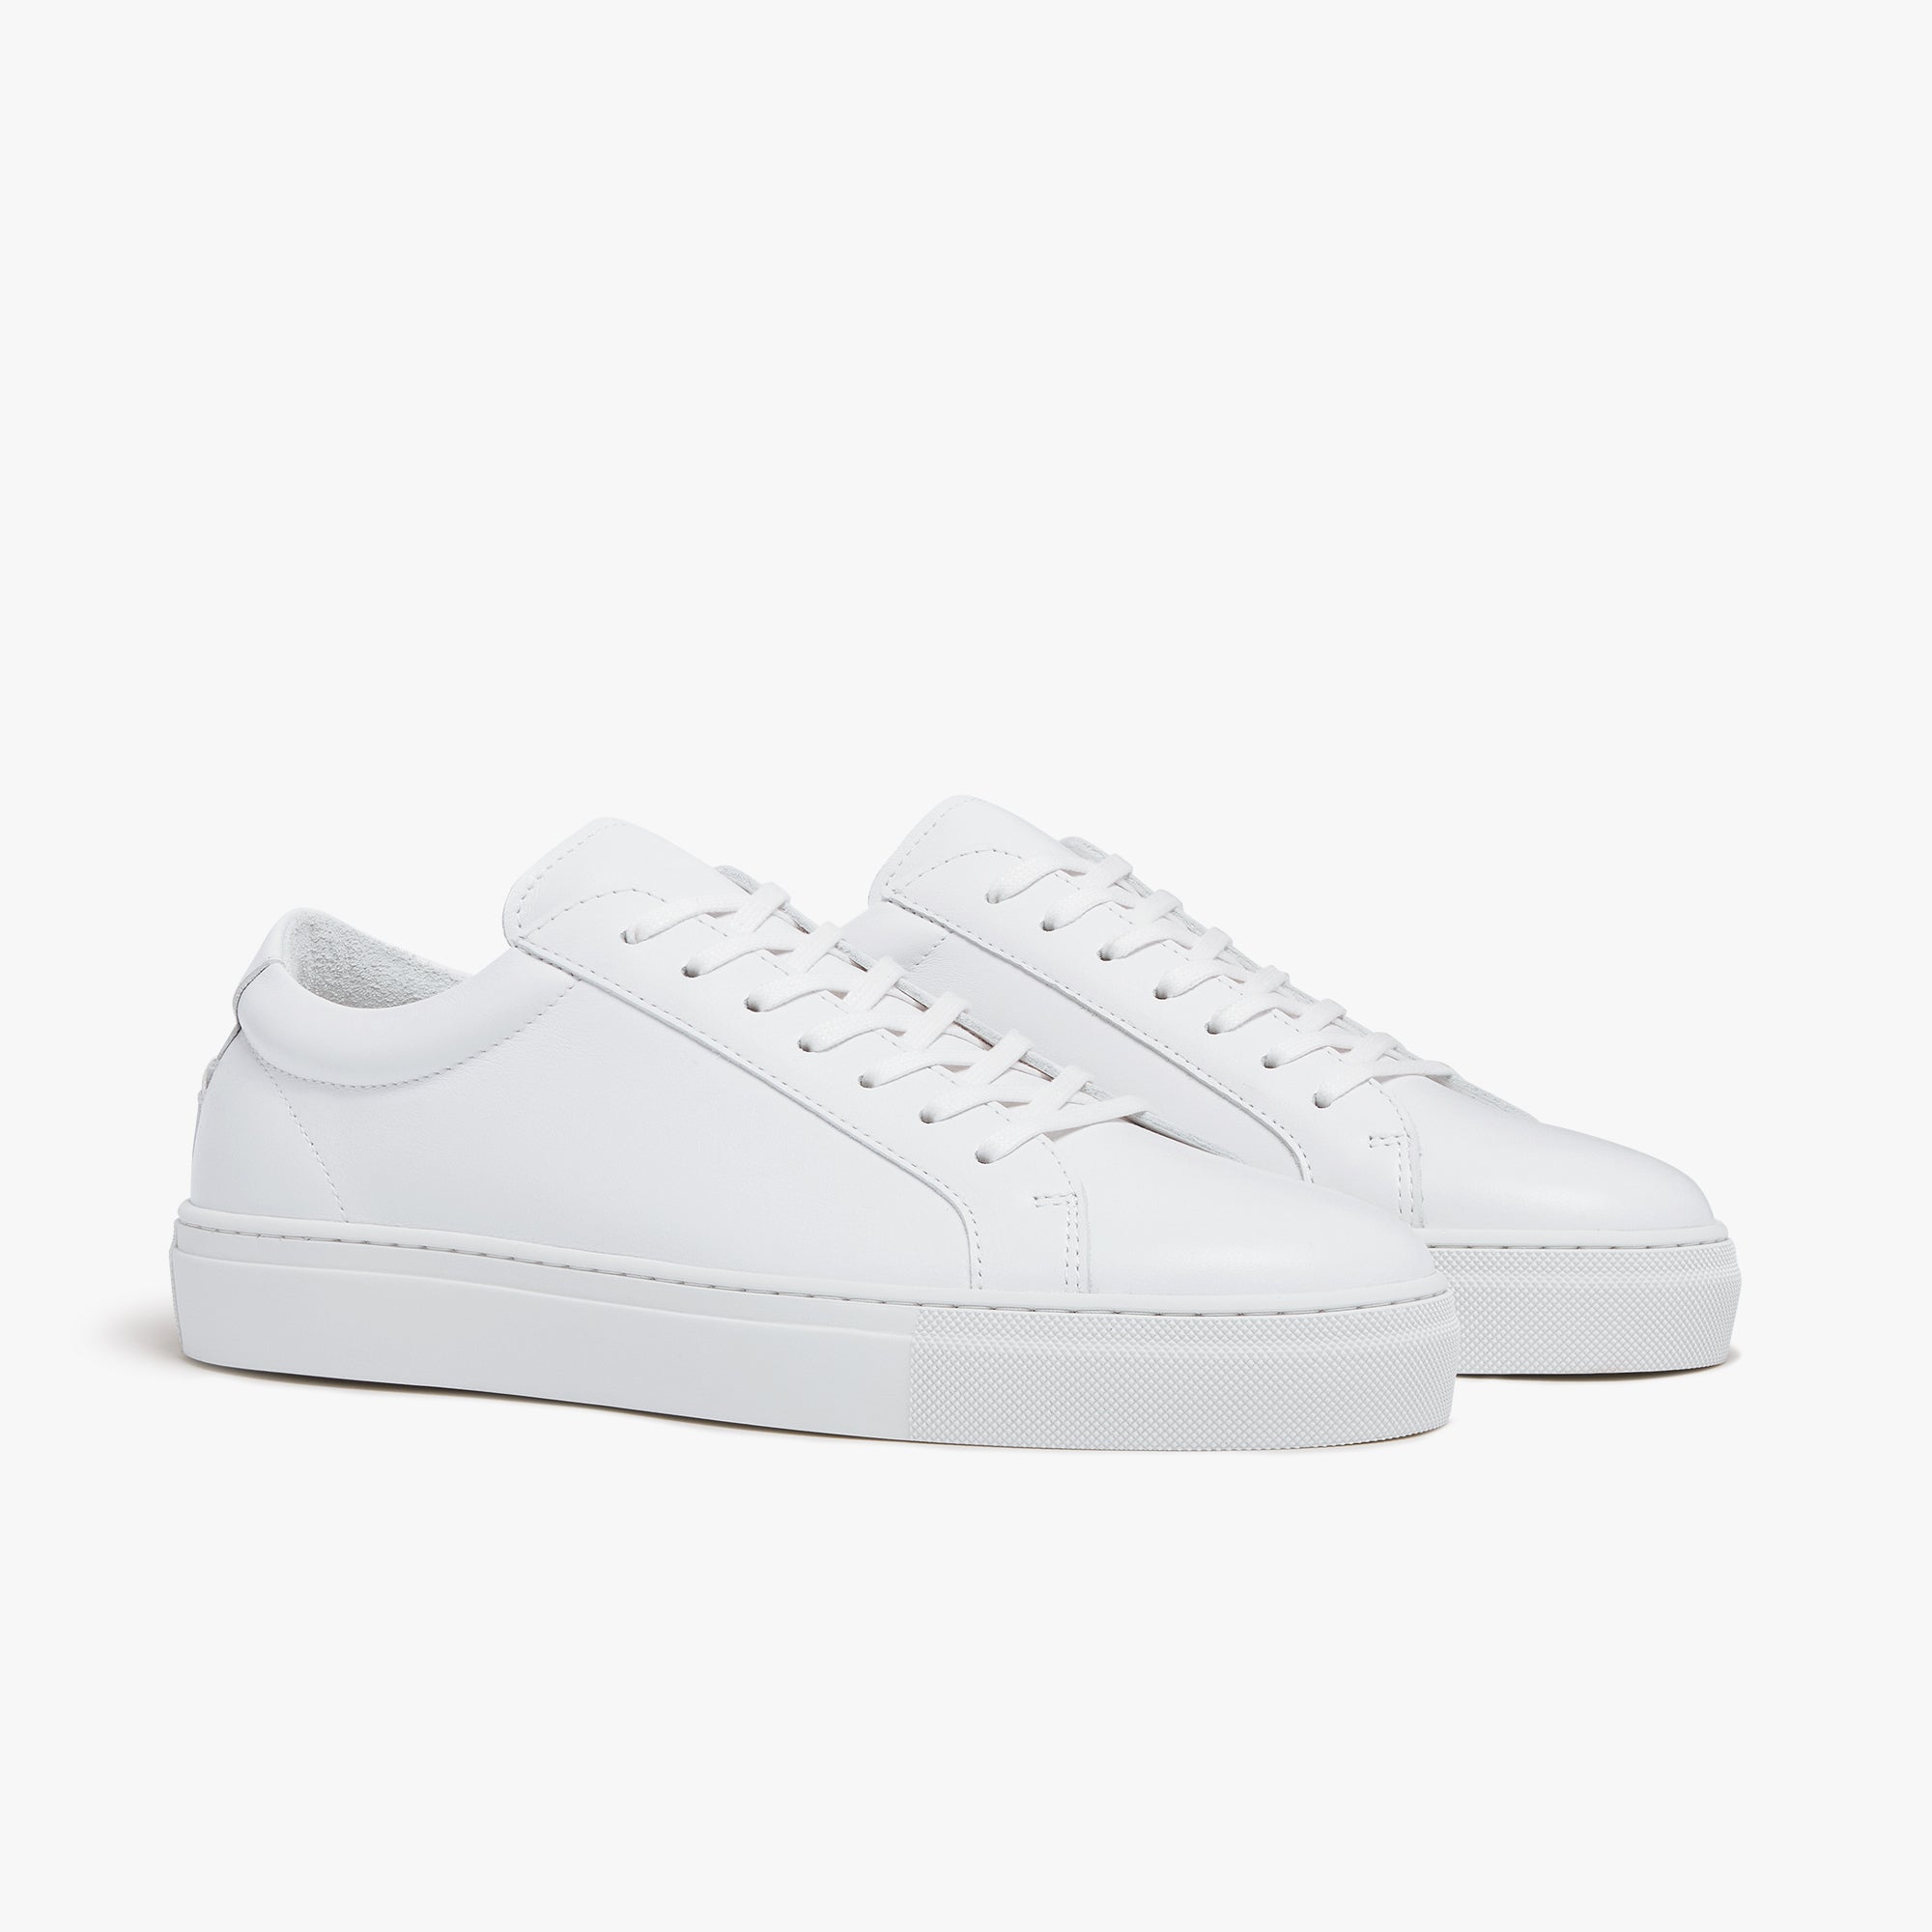 Series 1 Triple White Leather Womens